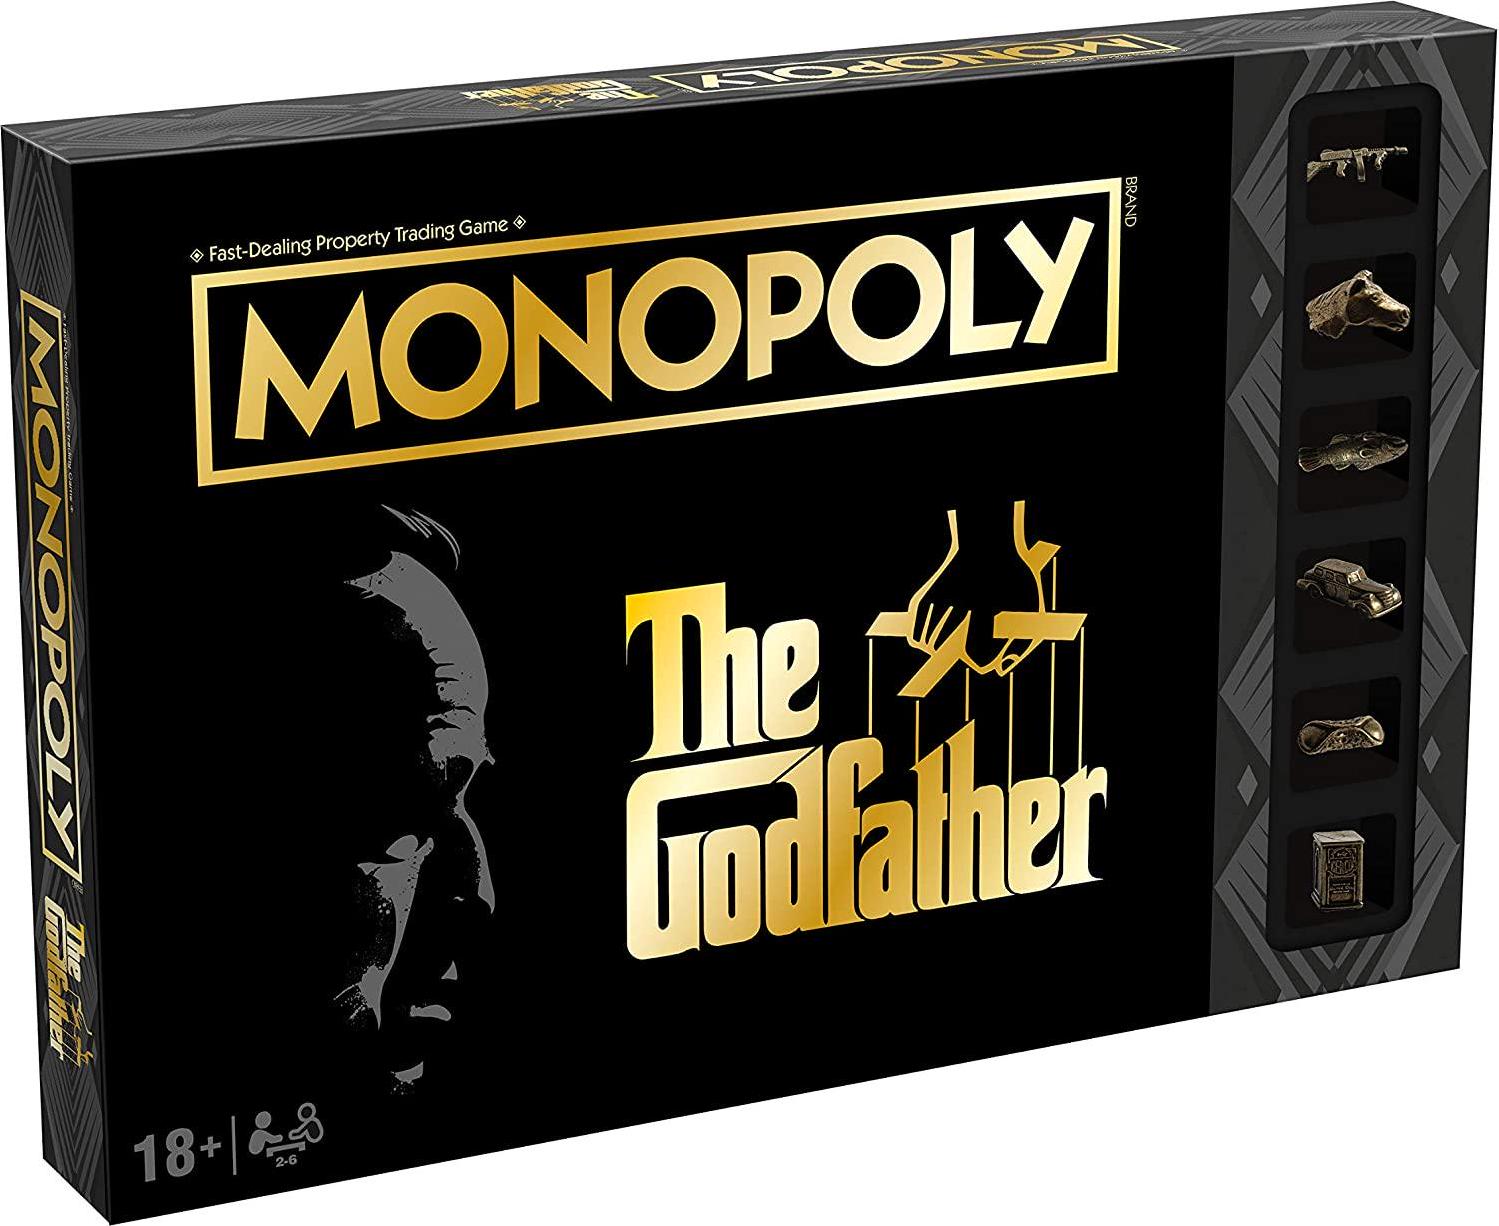 MONOPOLY, MONOPOLY The Godfather Black/Gold